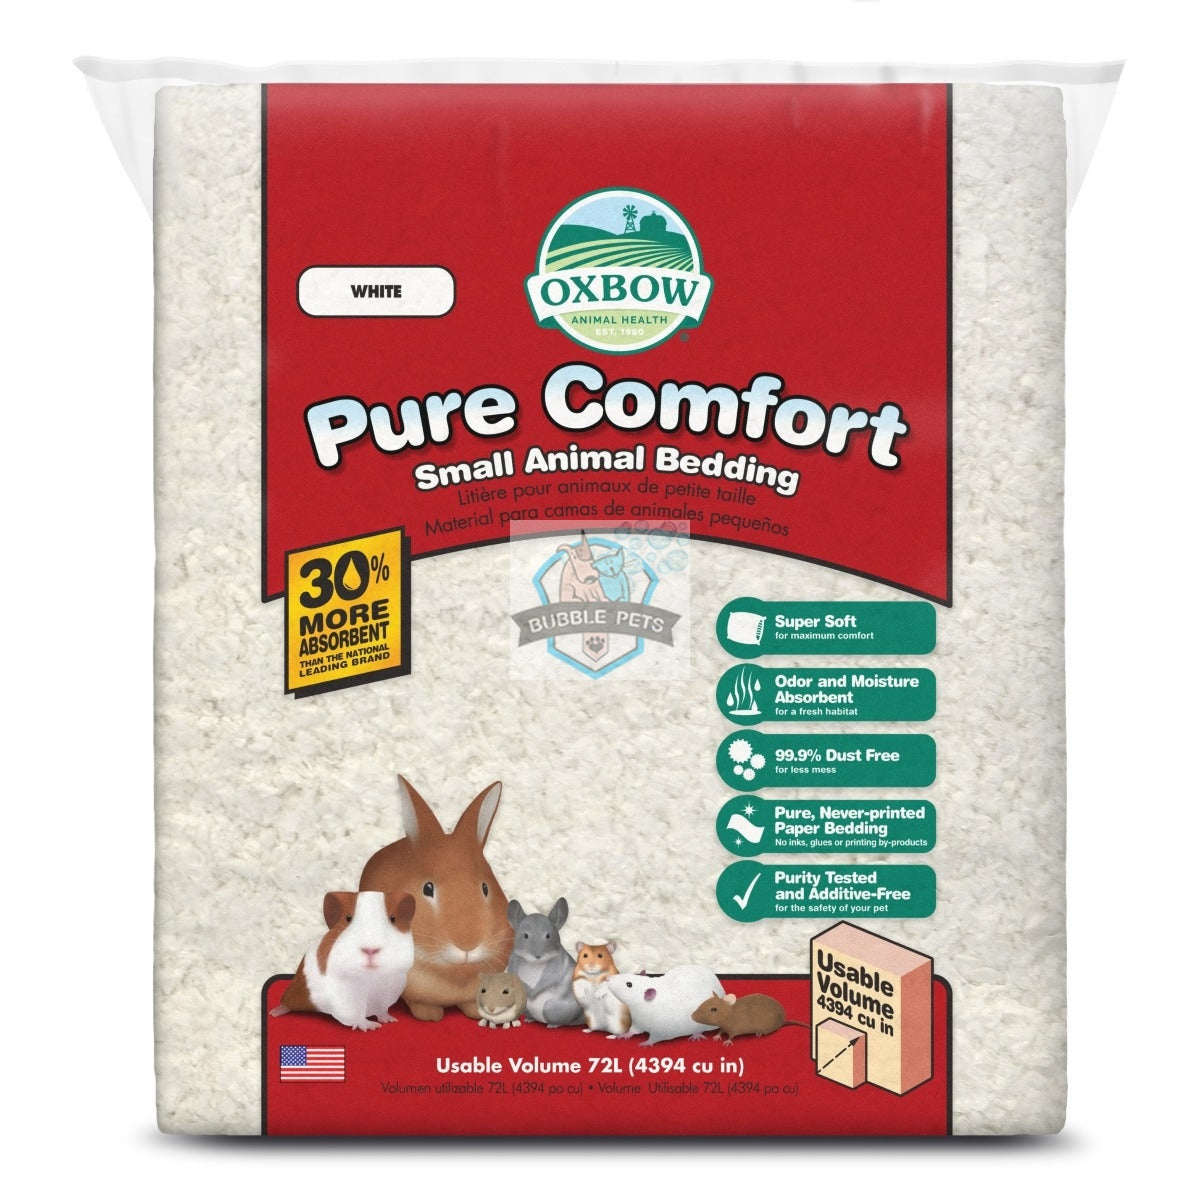 Oxbow Pure Comfort White Small Animal Bedding